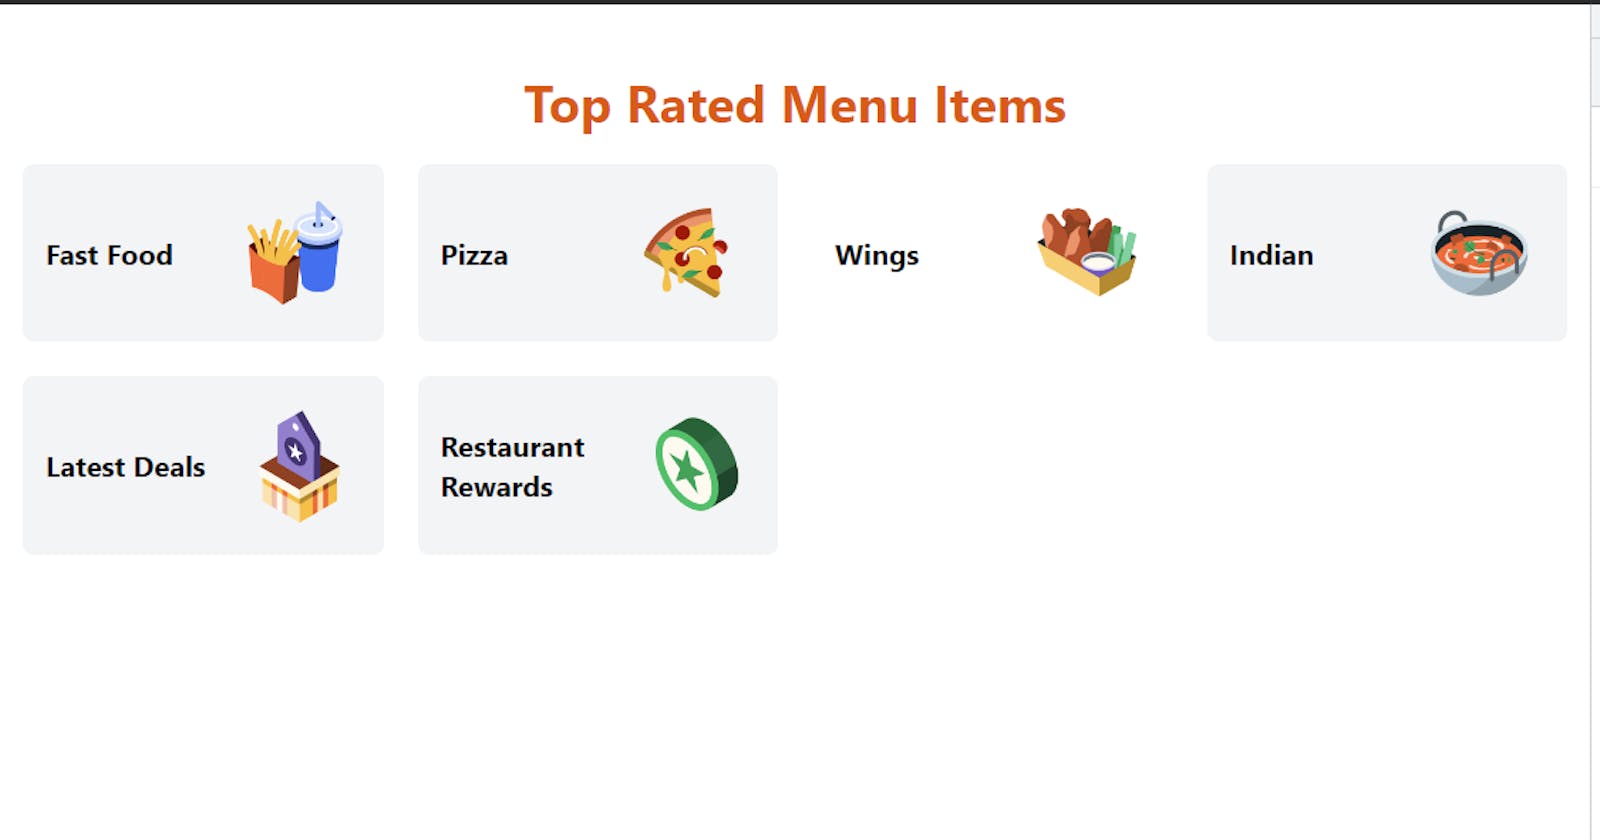 Building a Restaurant Category Component with Tailwind CSS in React